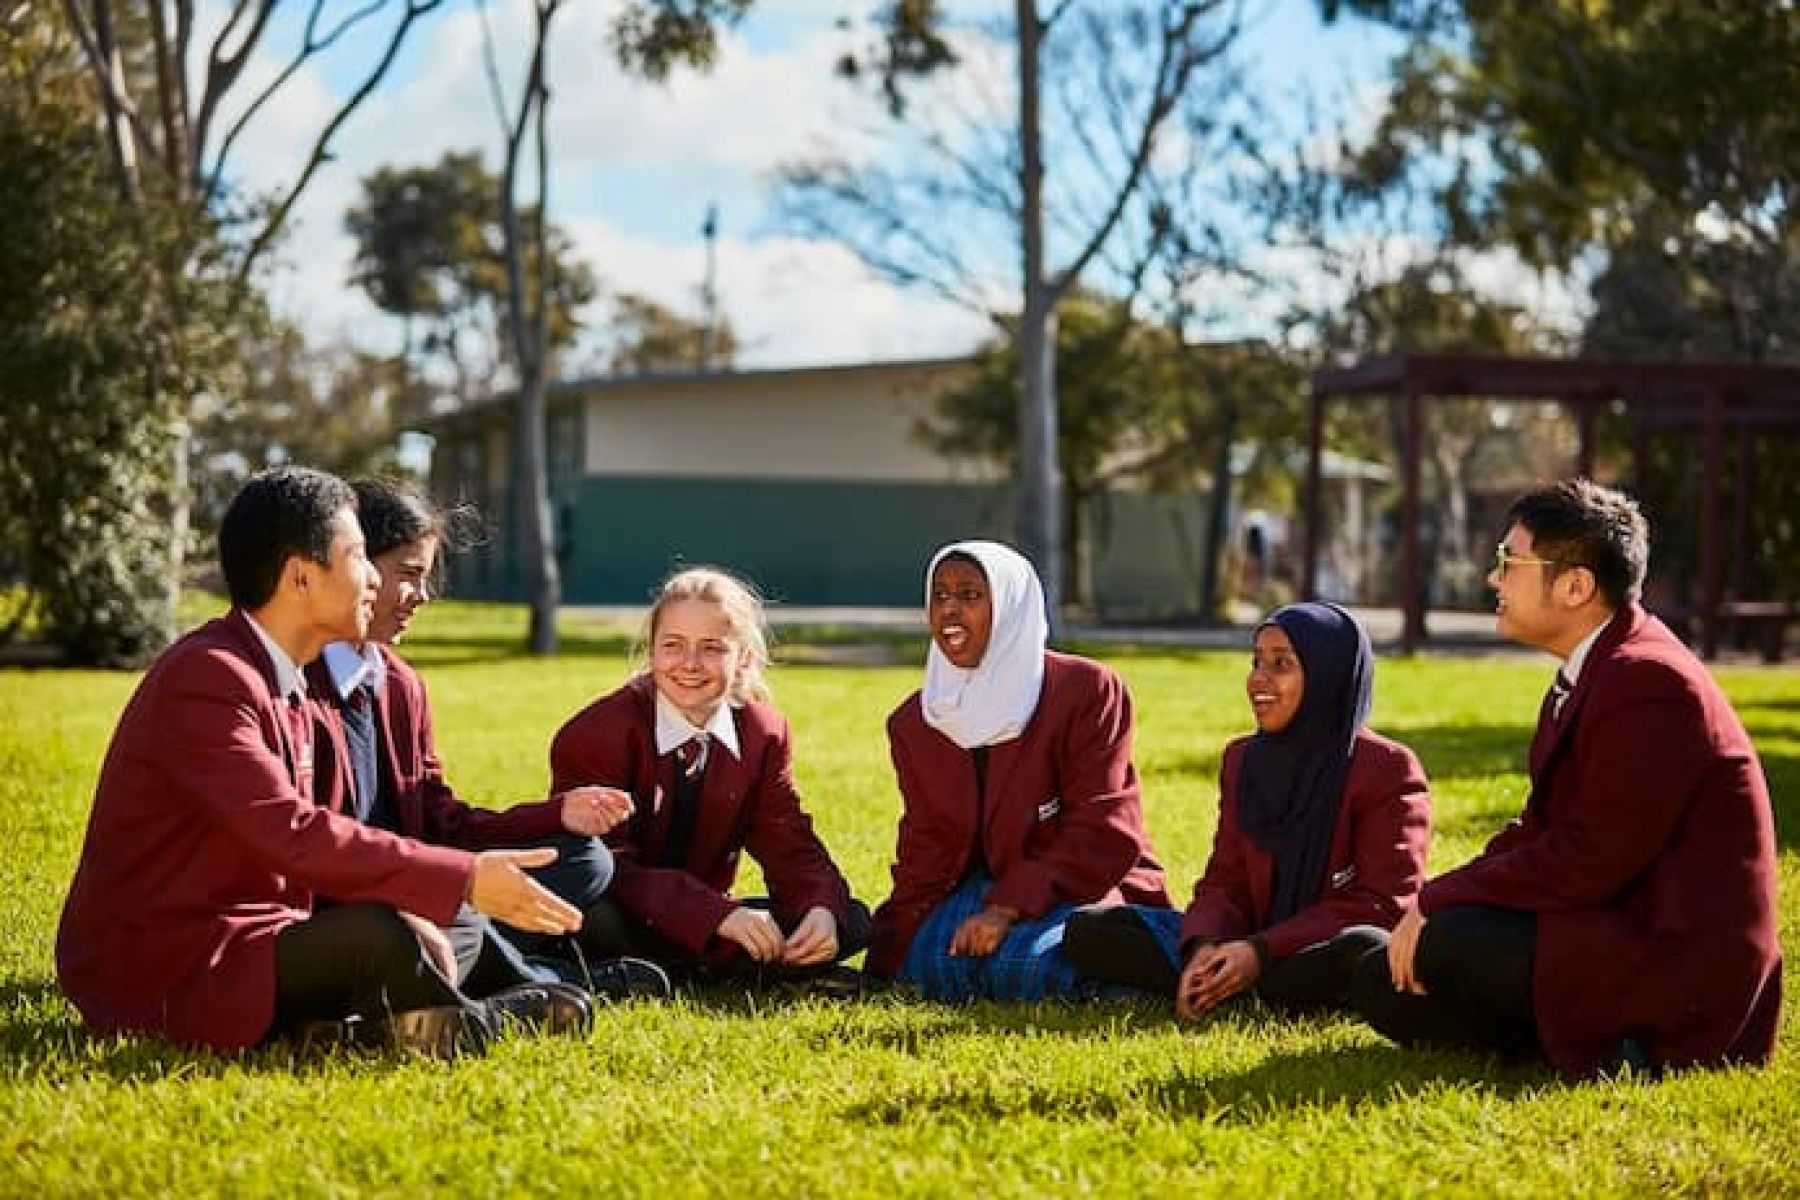 6 high school students sitting and having a conversation on a field